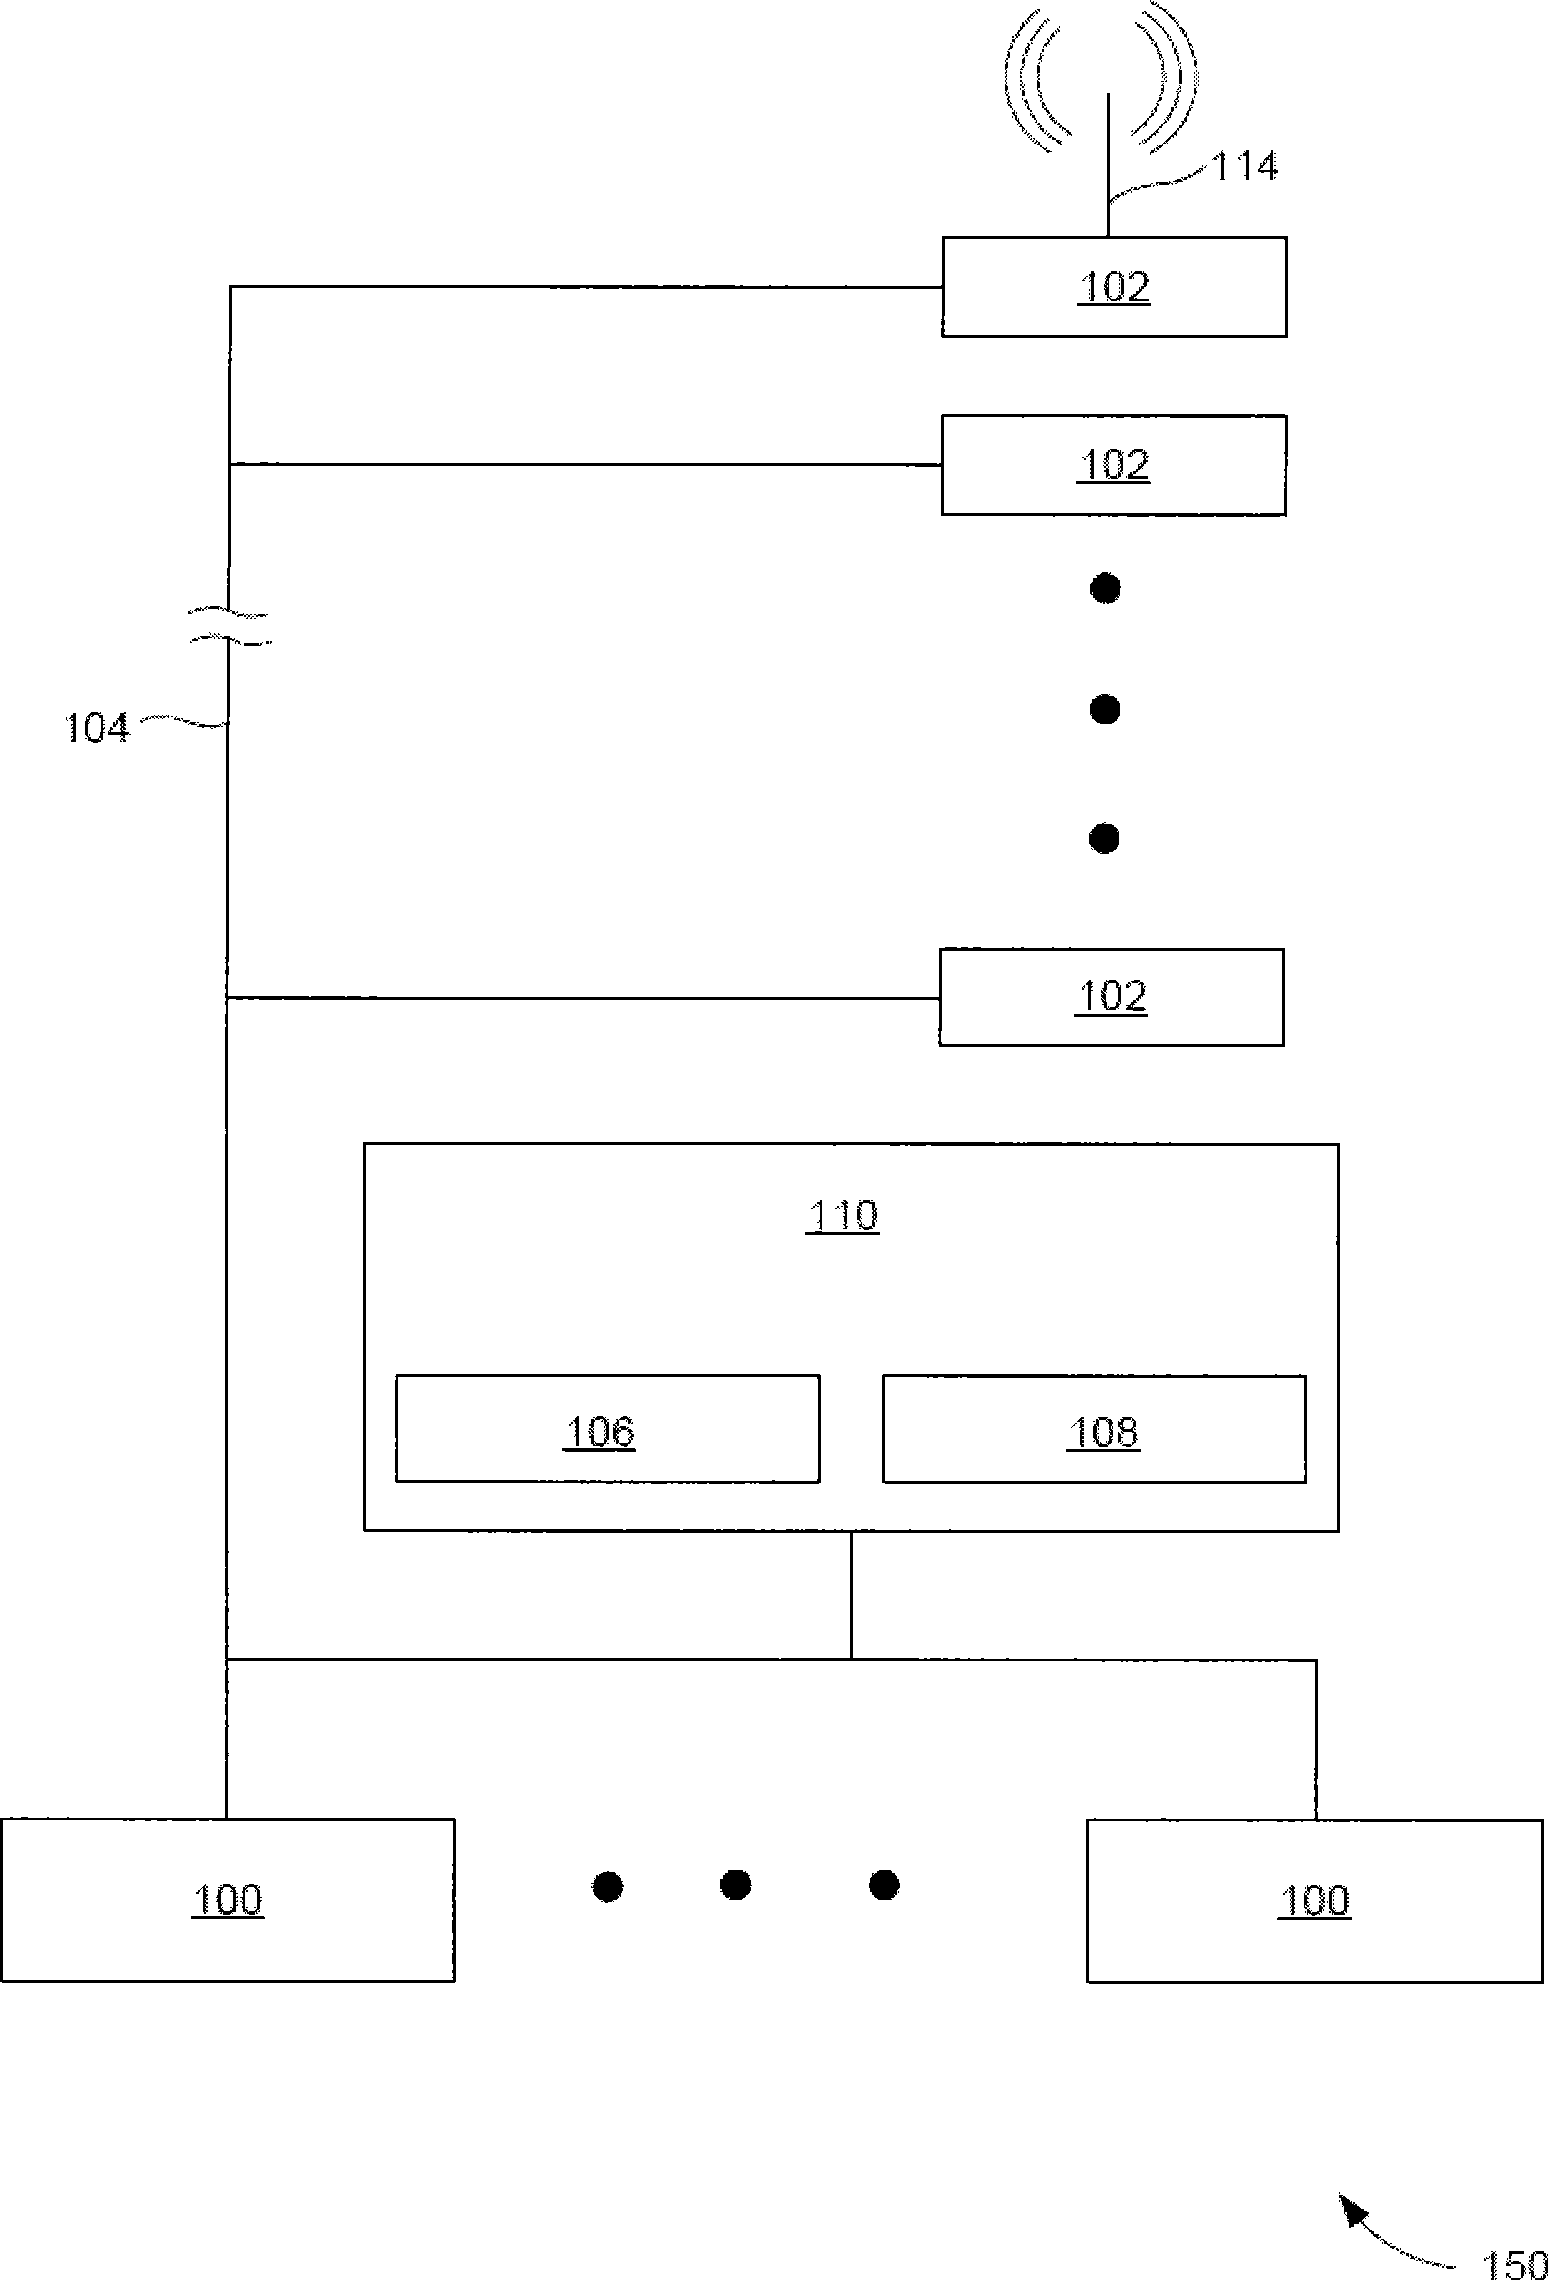 Breathable air safety system and method having an air storage sub-system